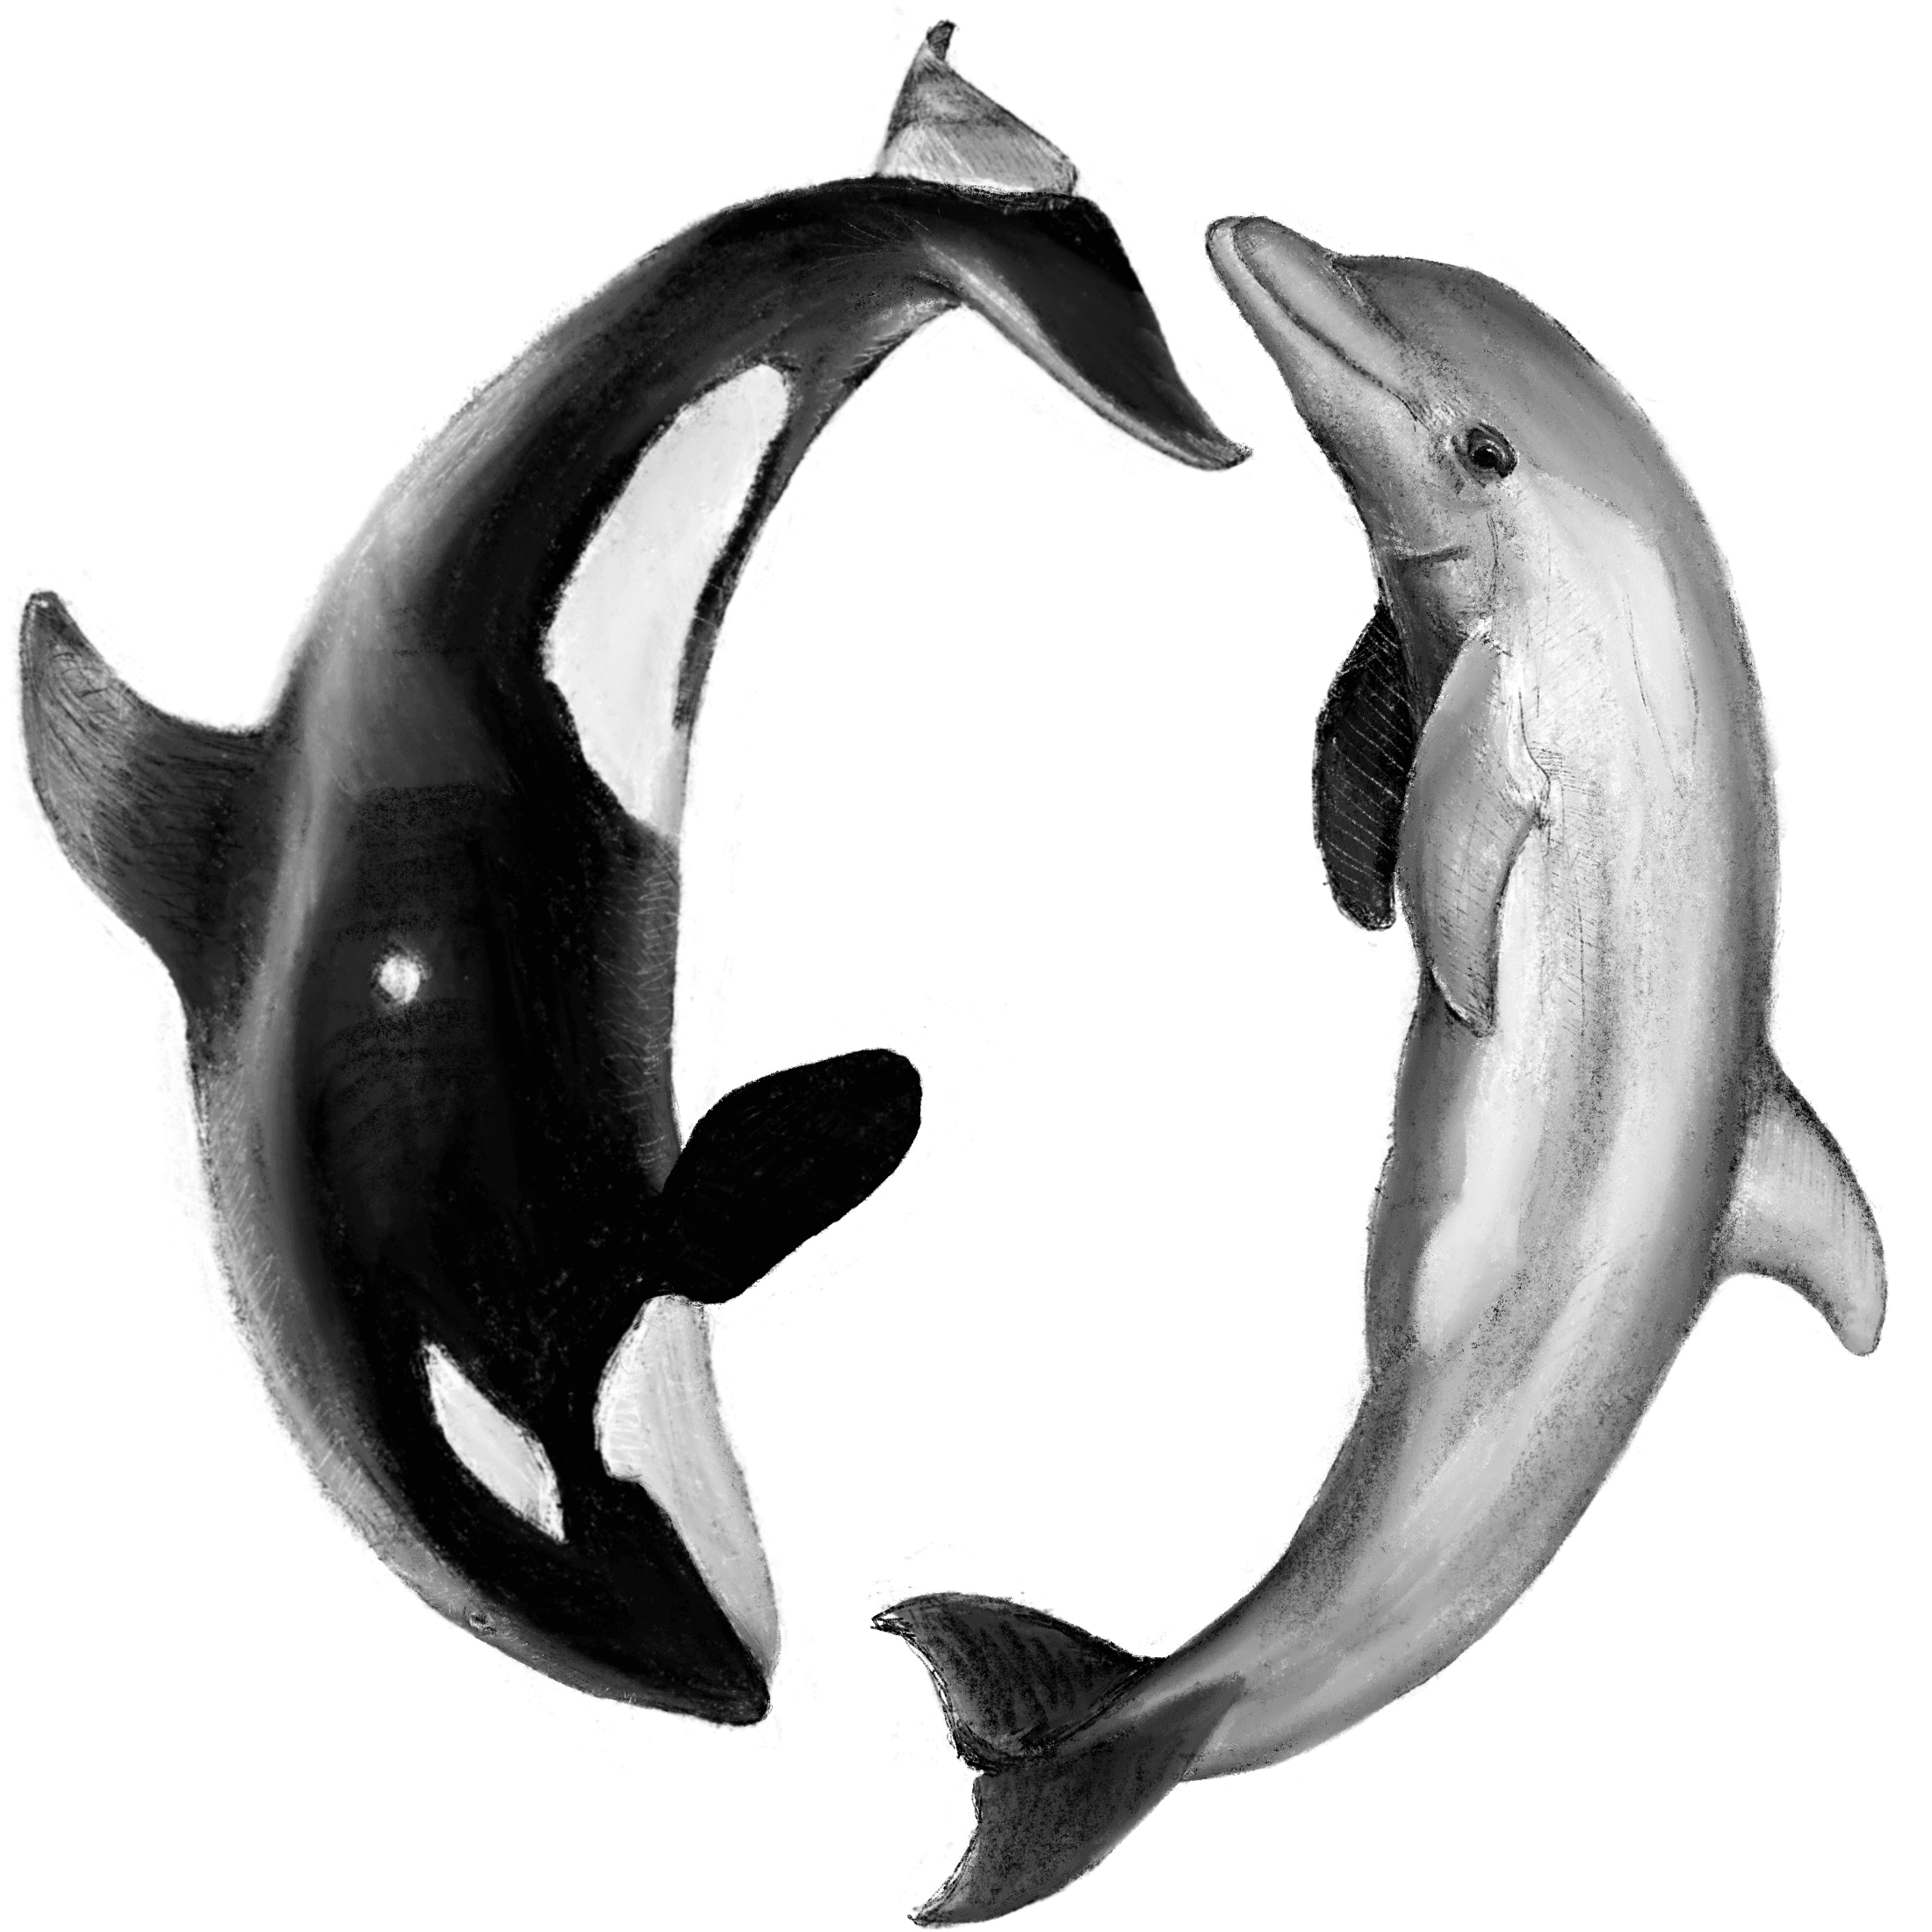 2022-07-26 Orca and Dolphin